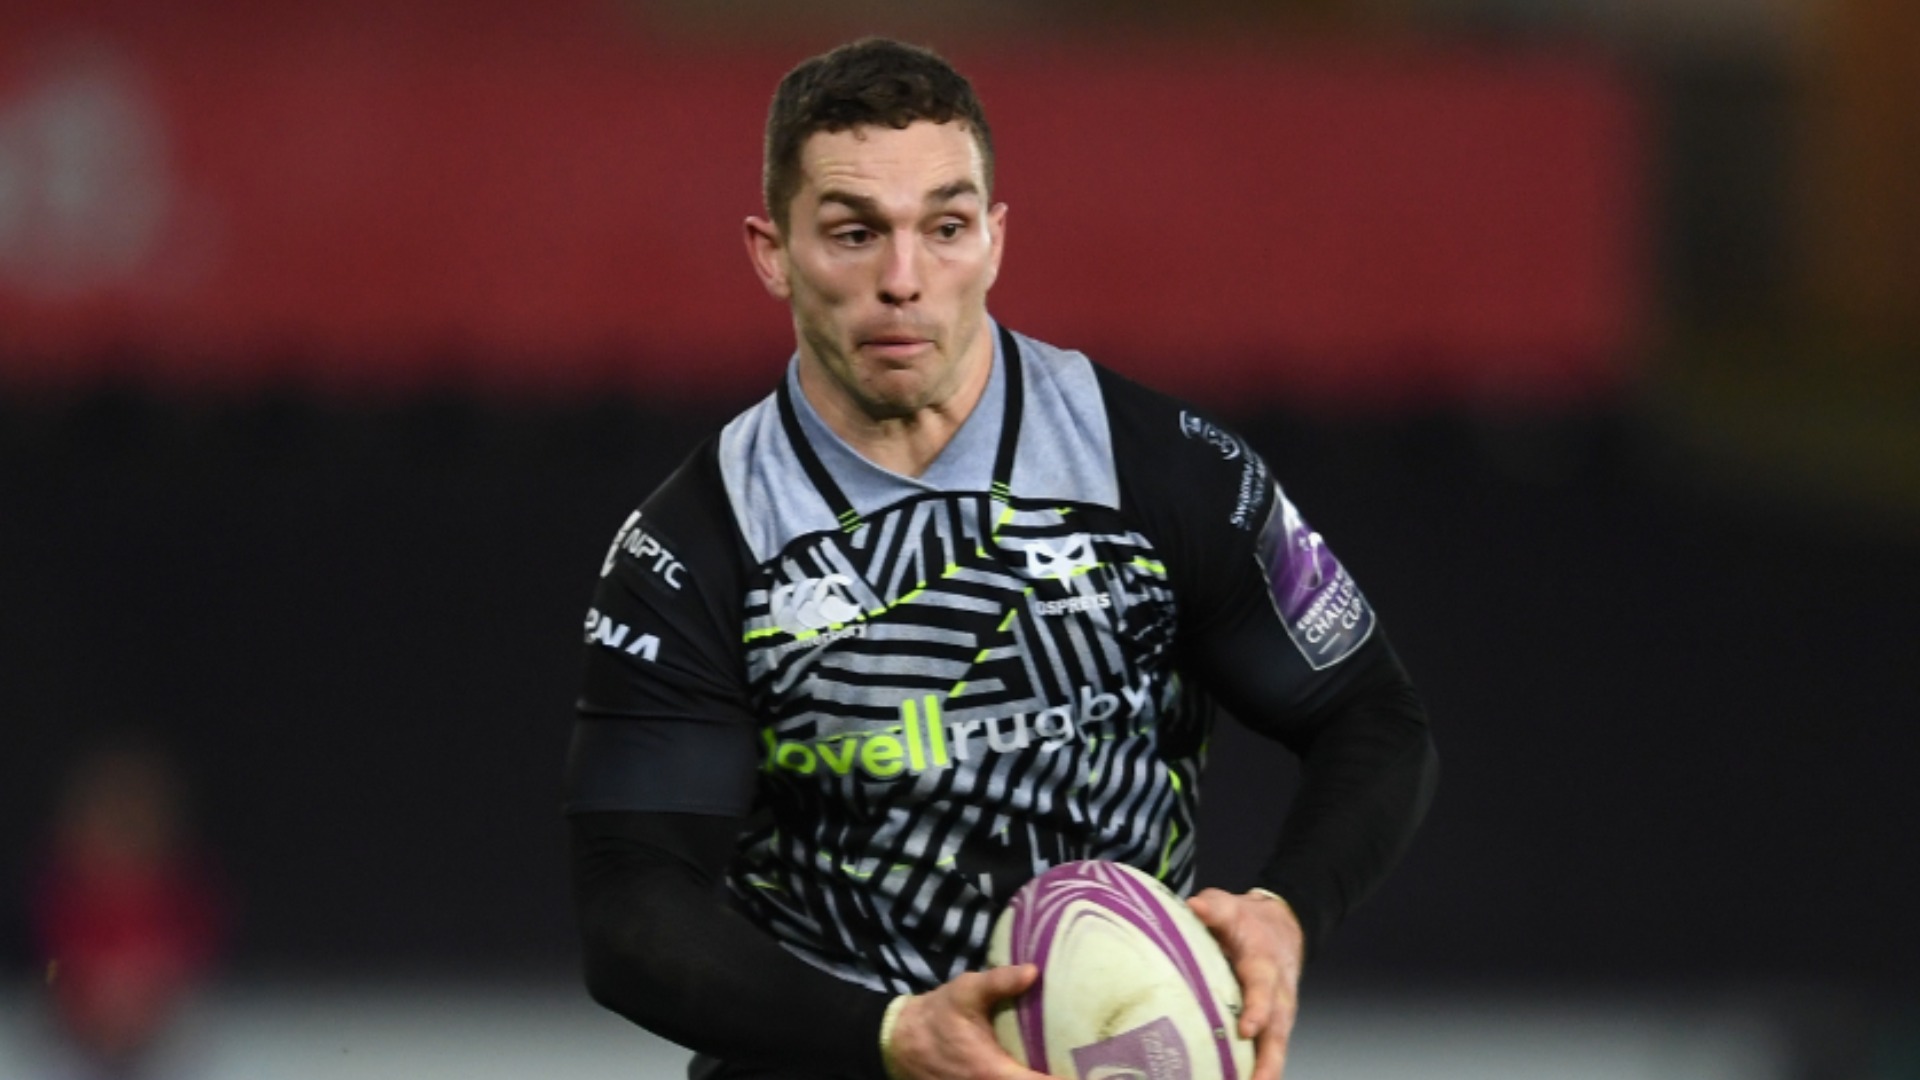 North scores on return in dramatic Ospreys defeat